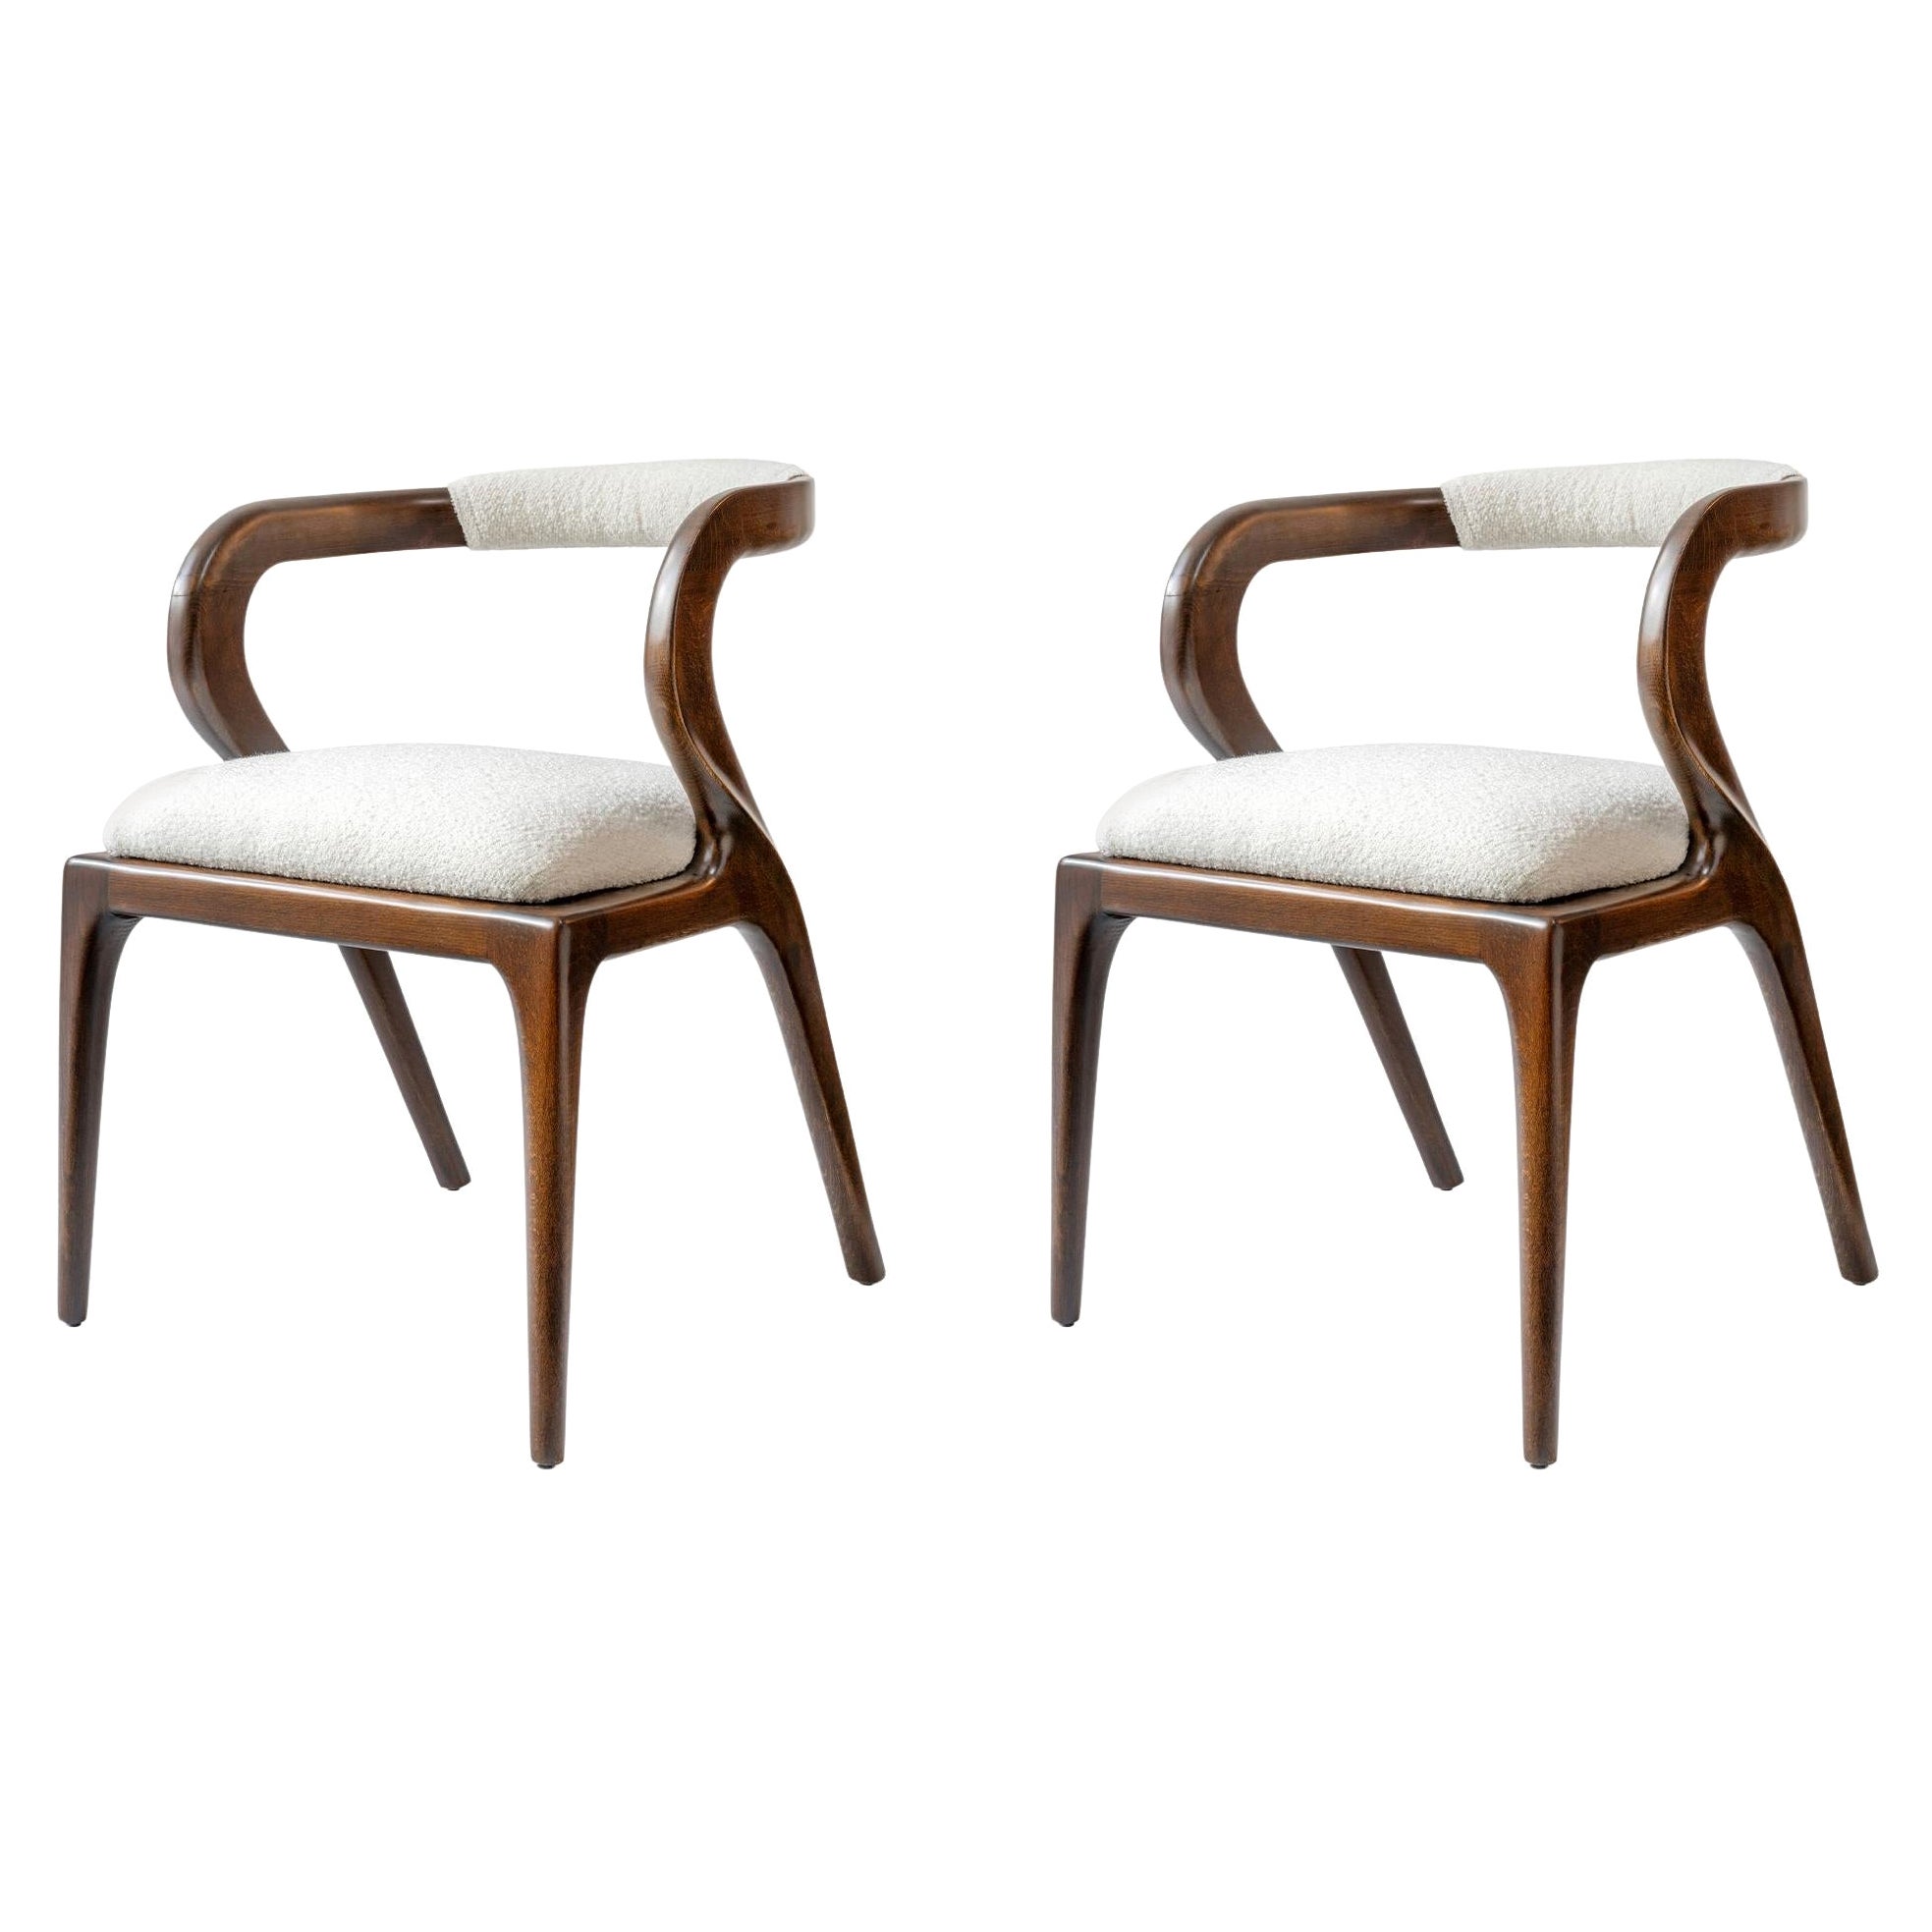 Set of 2, Nana Wooden Dining Chair with Back Detail, No:2